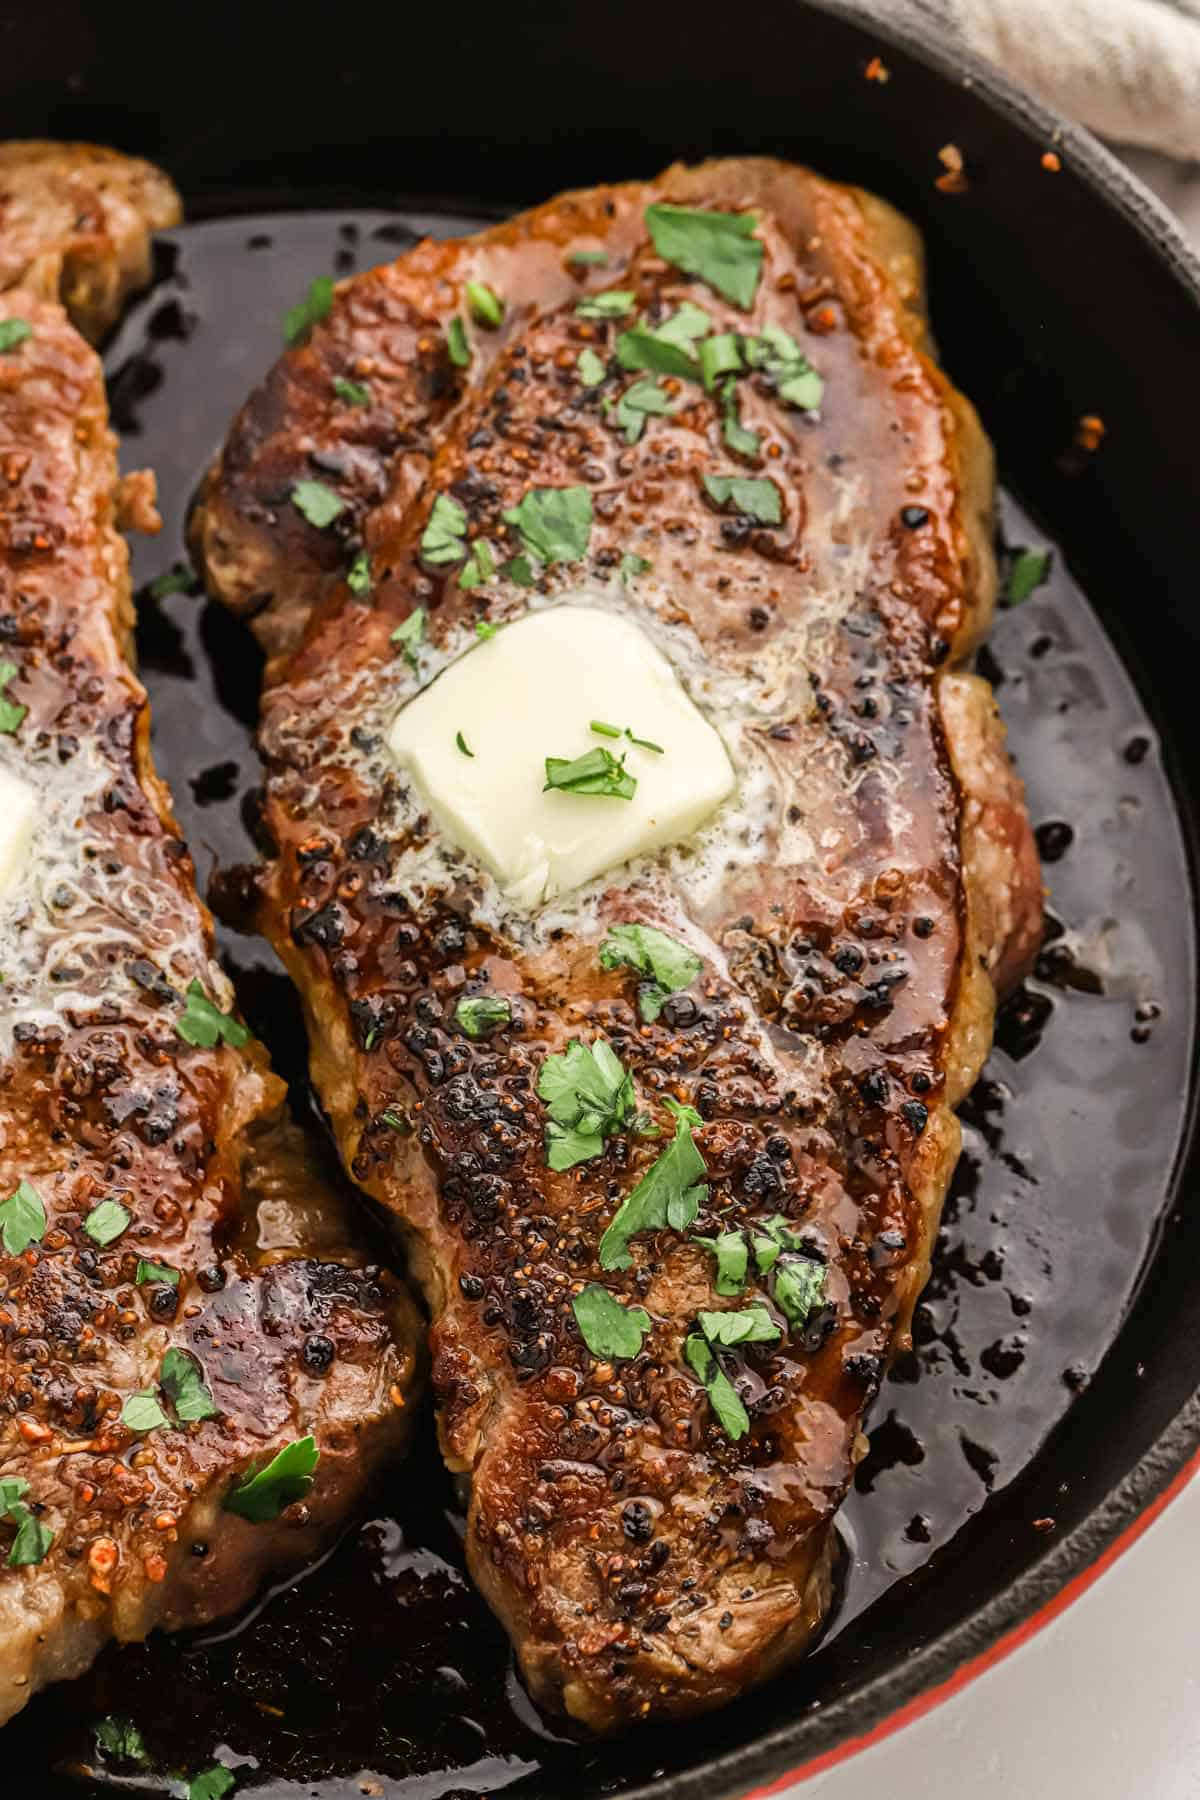 Pan seared steaks in a skillet topped with a pat of melting butter.